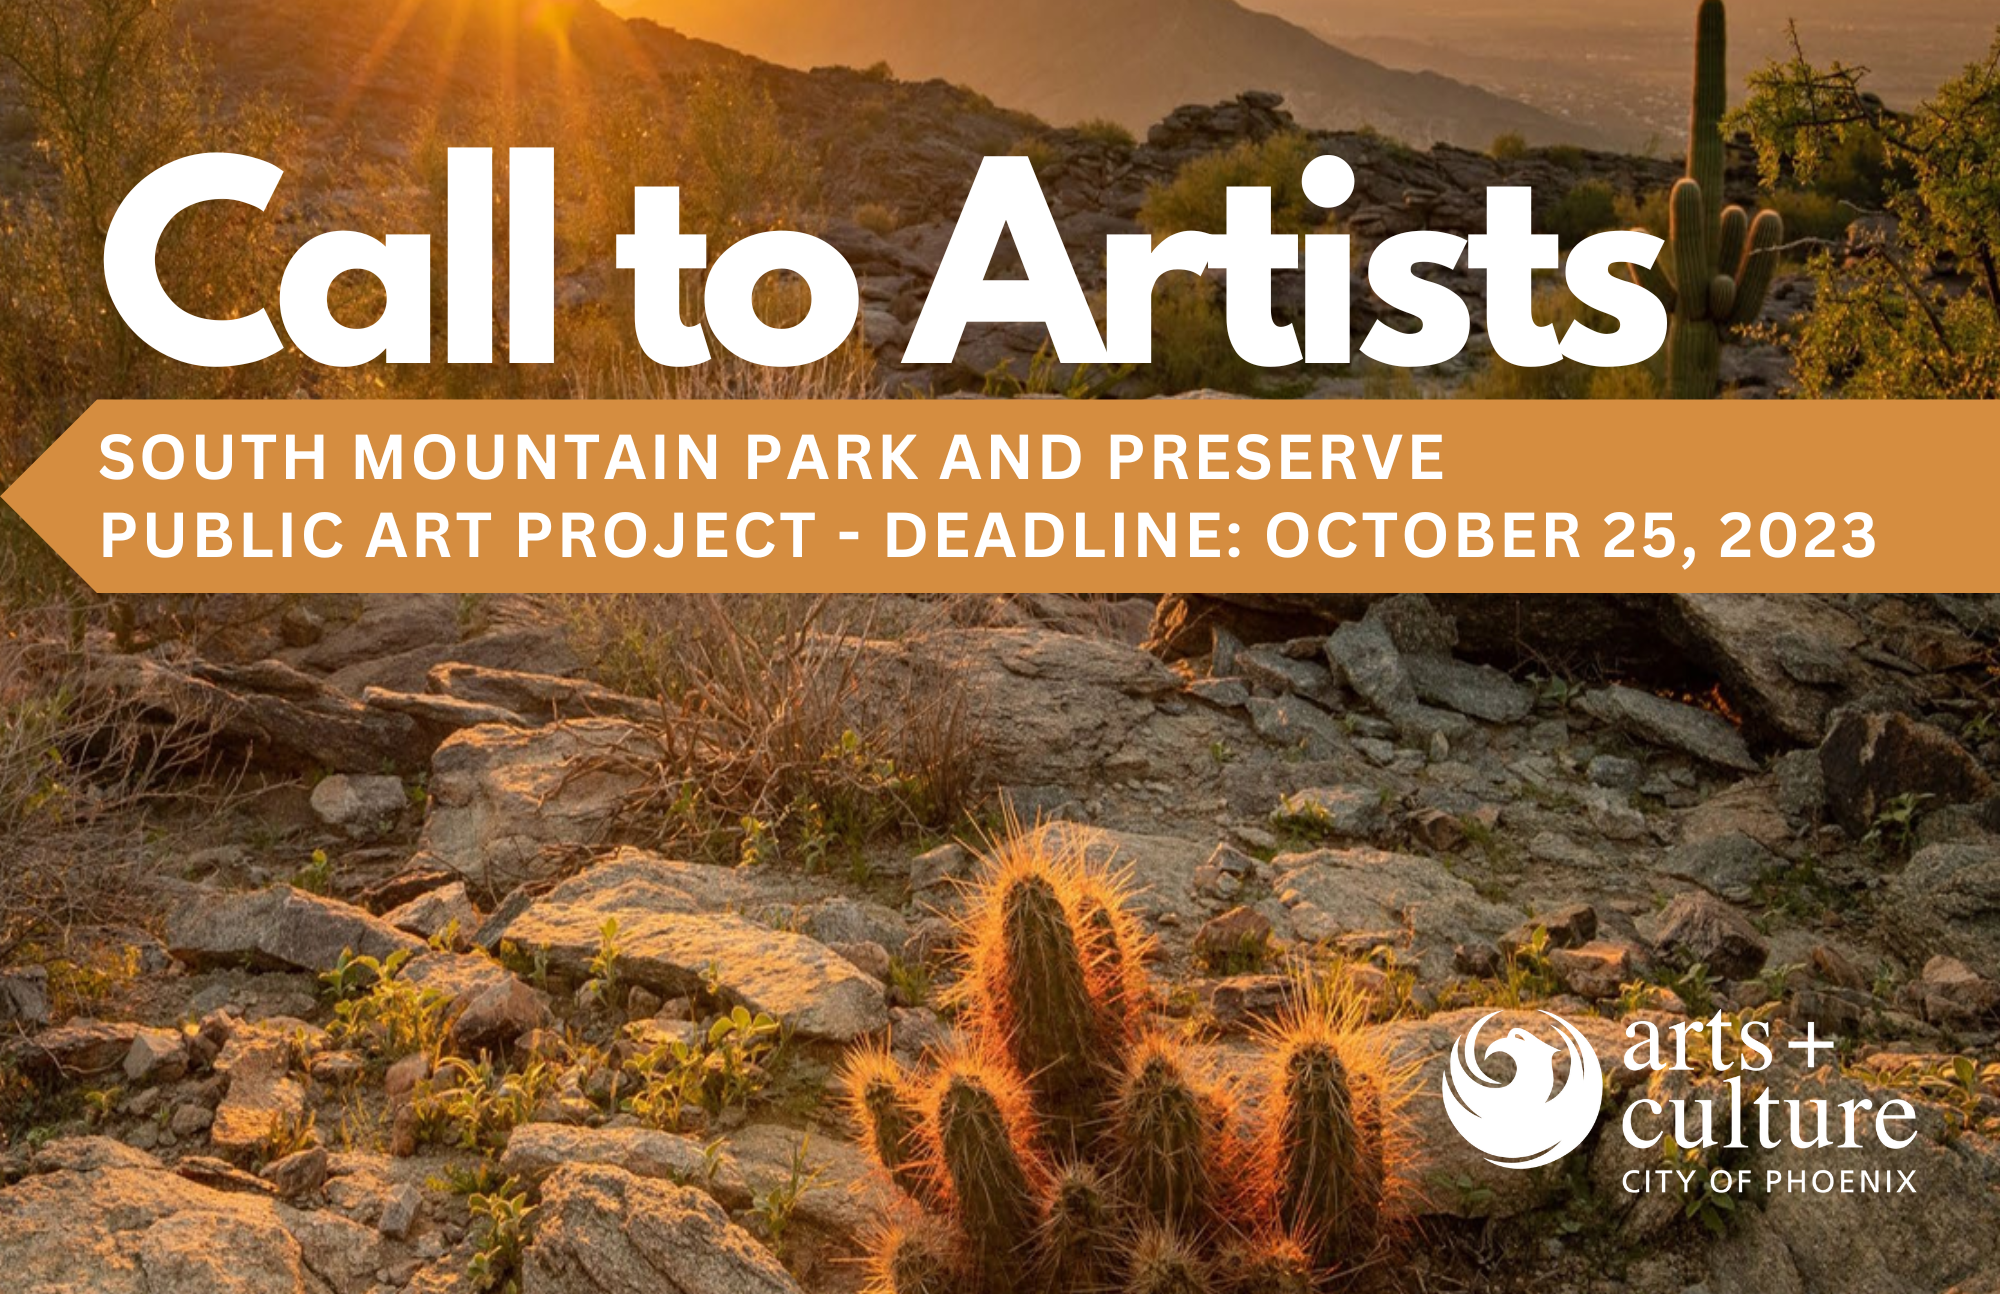 Call to Artists - South Moutain Parks and Preserve Public Art Project - the deadline to apply is October 25, 2023